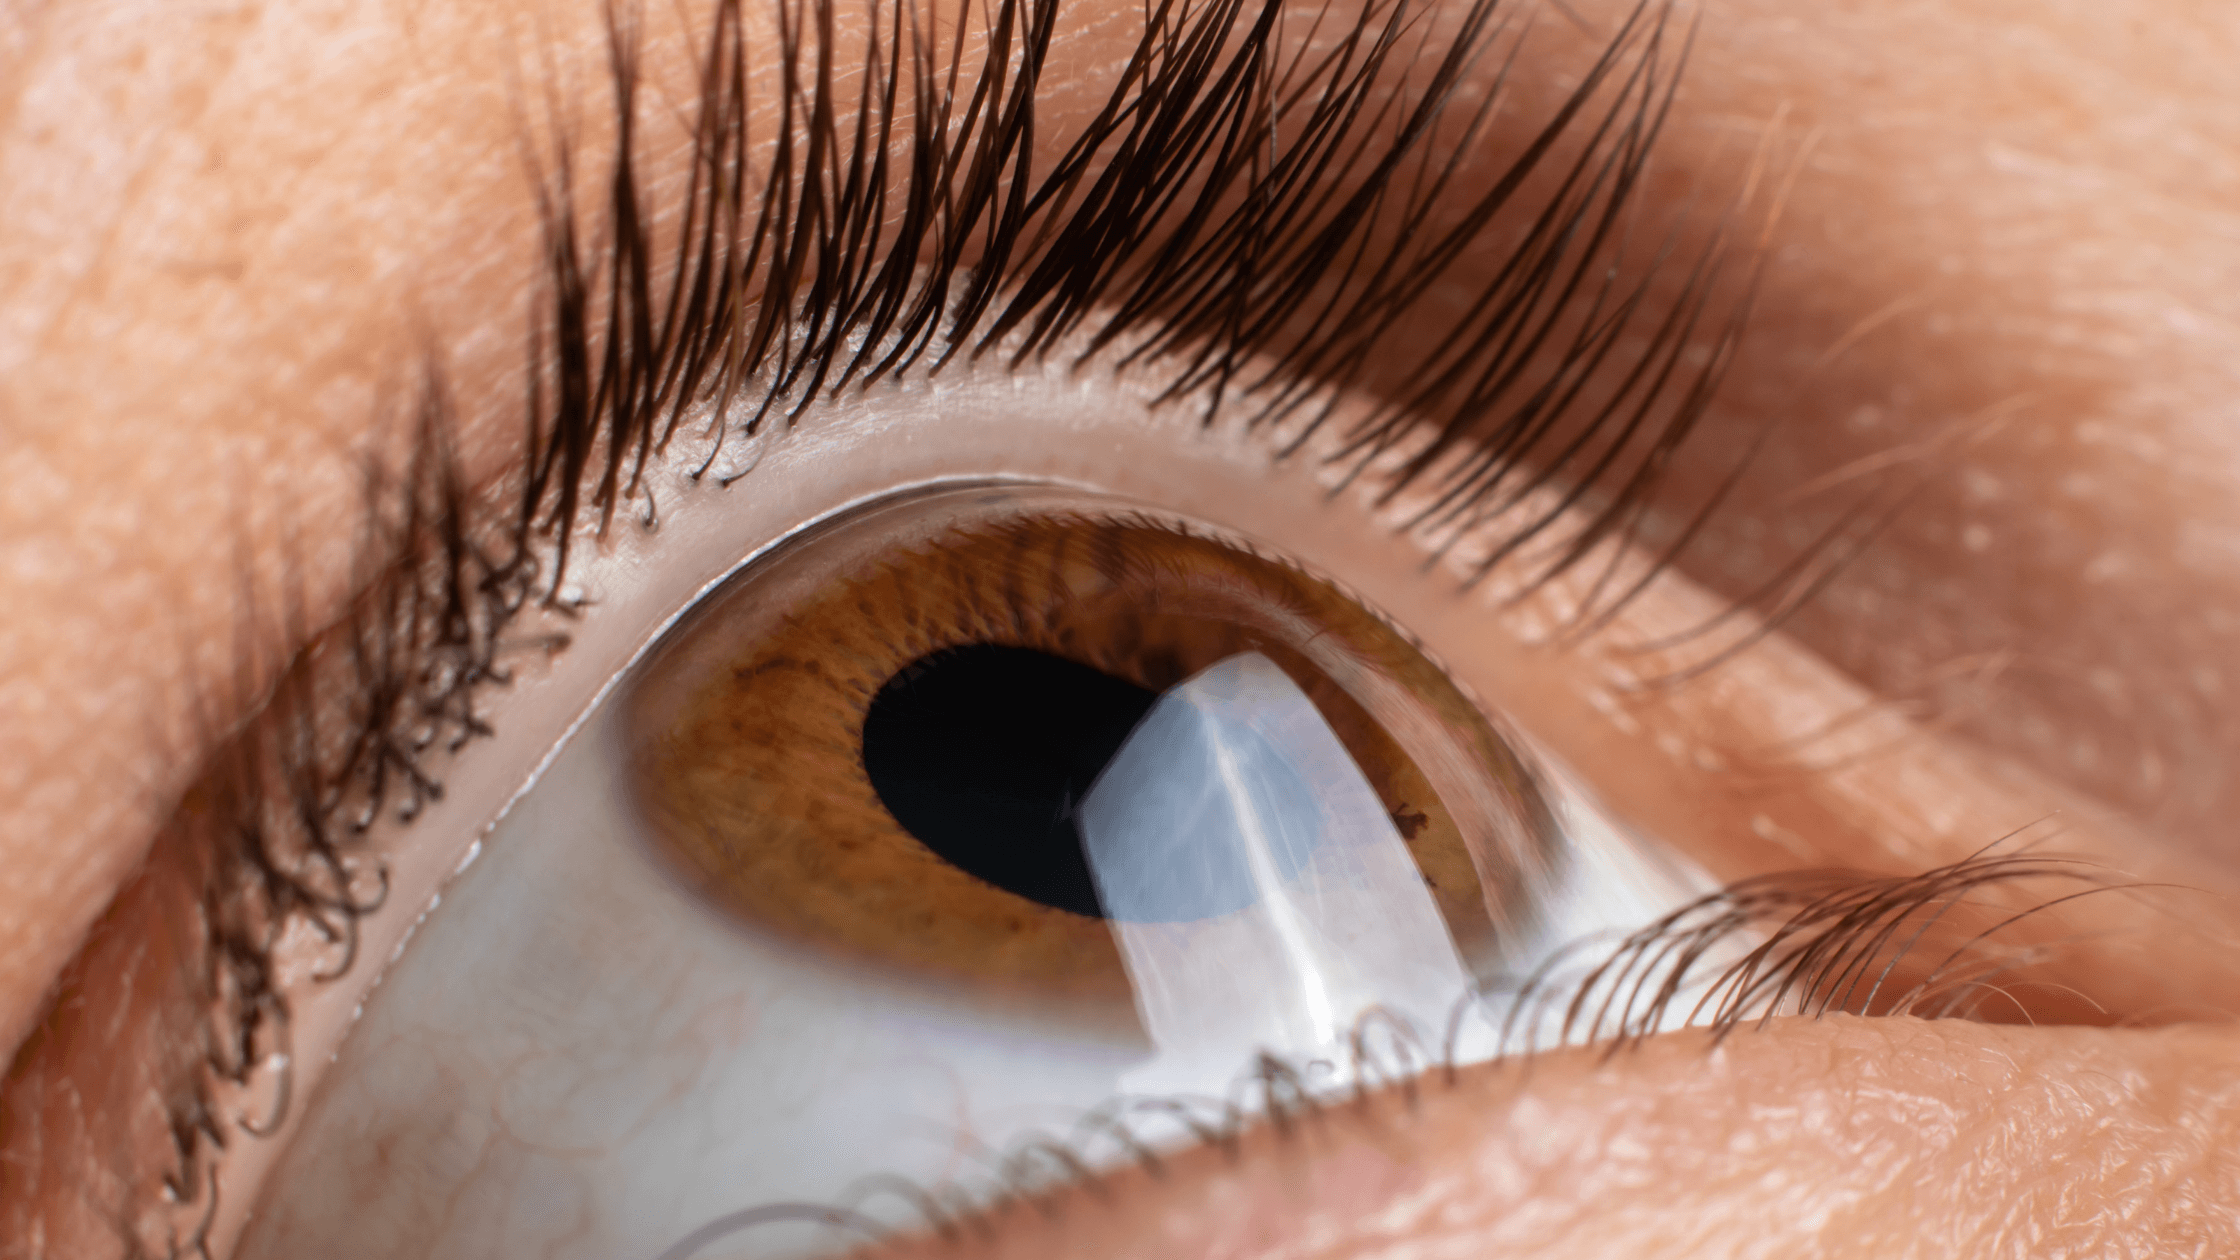 If you’ve been diagnosed with myopia, hyperopia, astigmatism or presbyopia, you may be an ideal candidate for Orthokeratology contact lenses